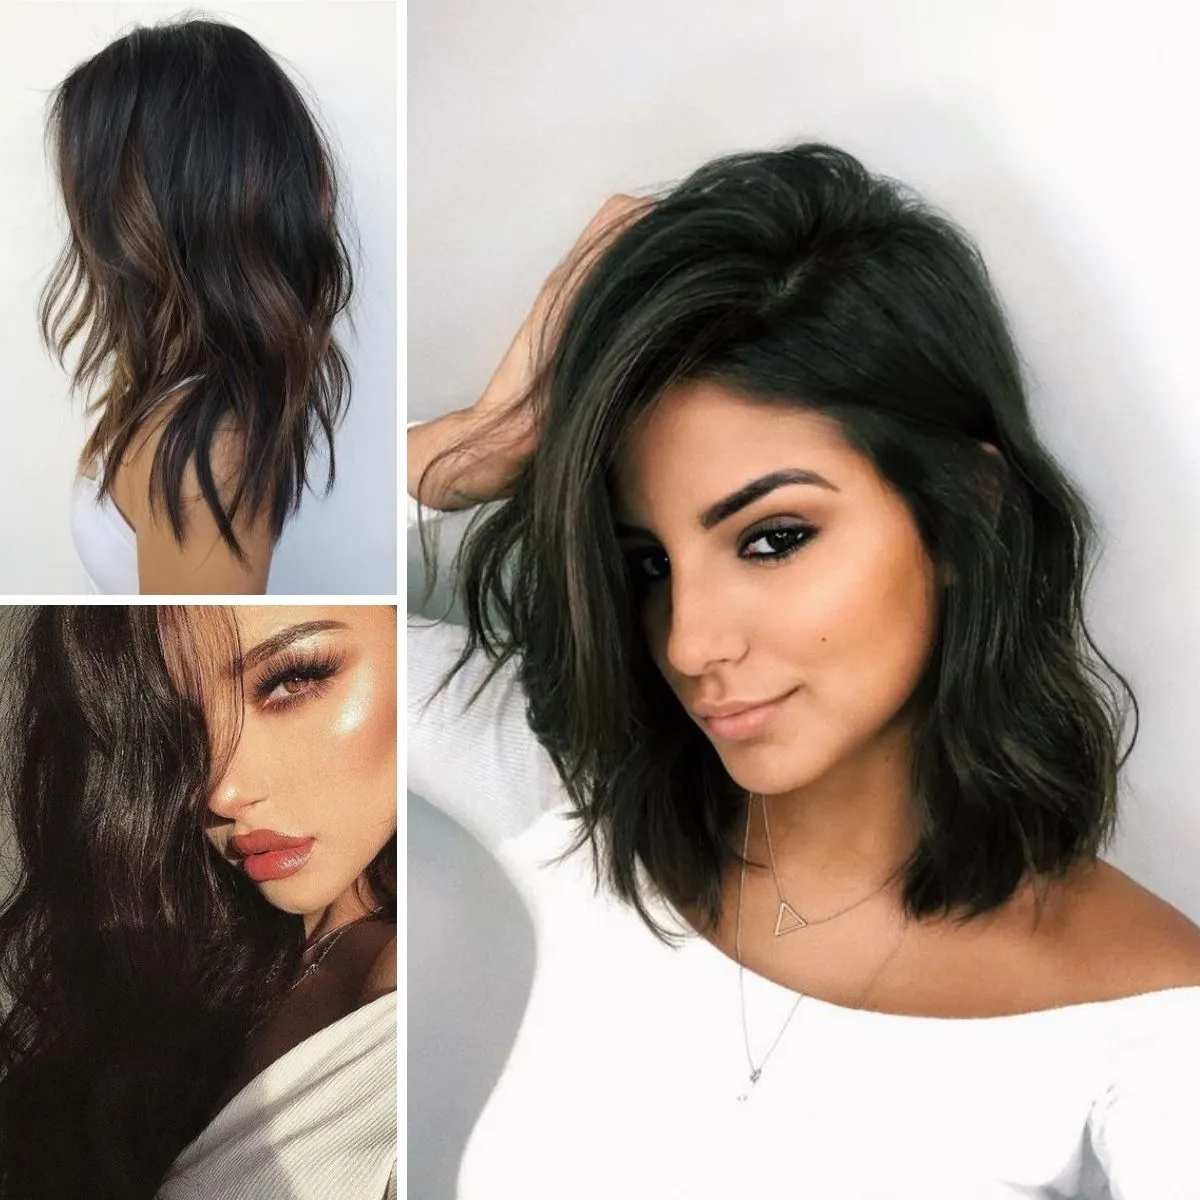 Black hair is classy, natural, and perfect for matching with any skin tone. Check out the latest trends in hair styling that you can do with warm black hair.